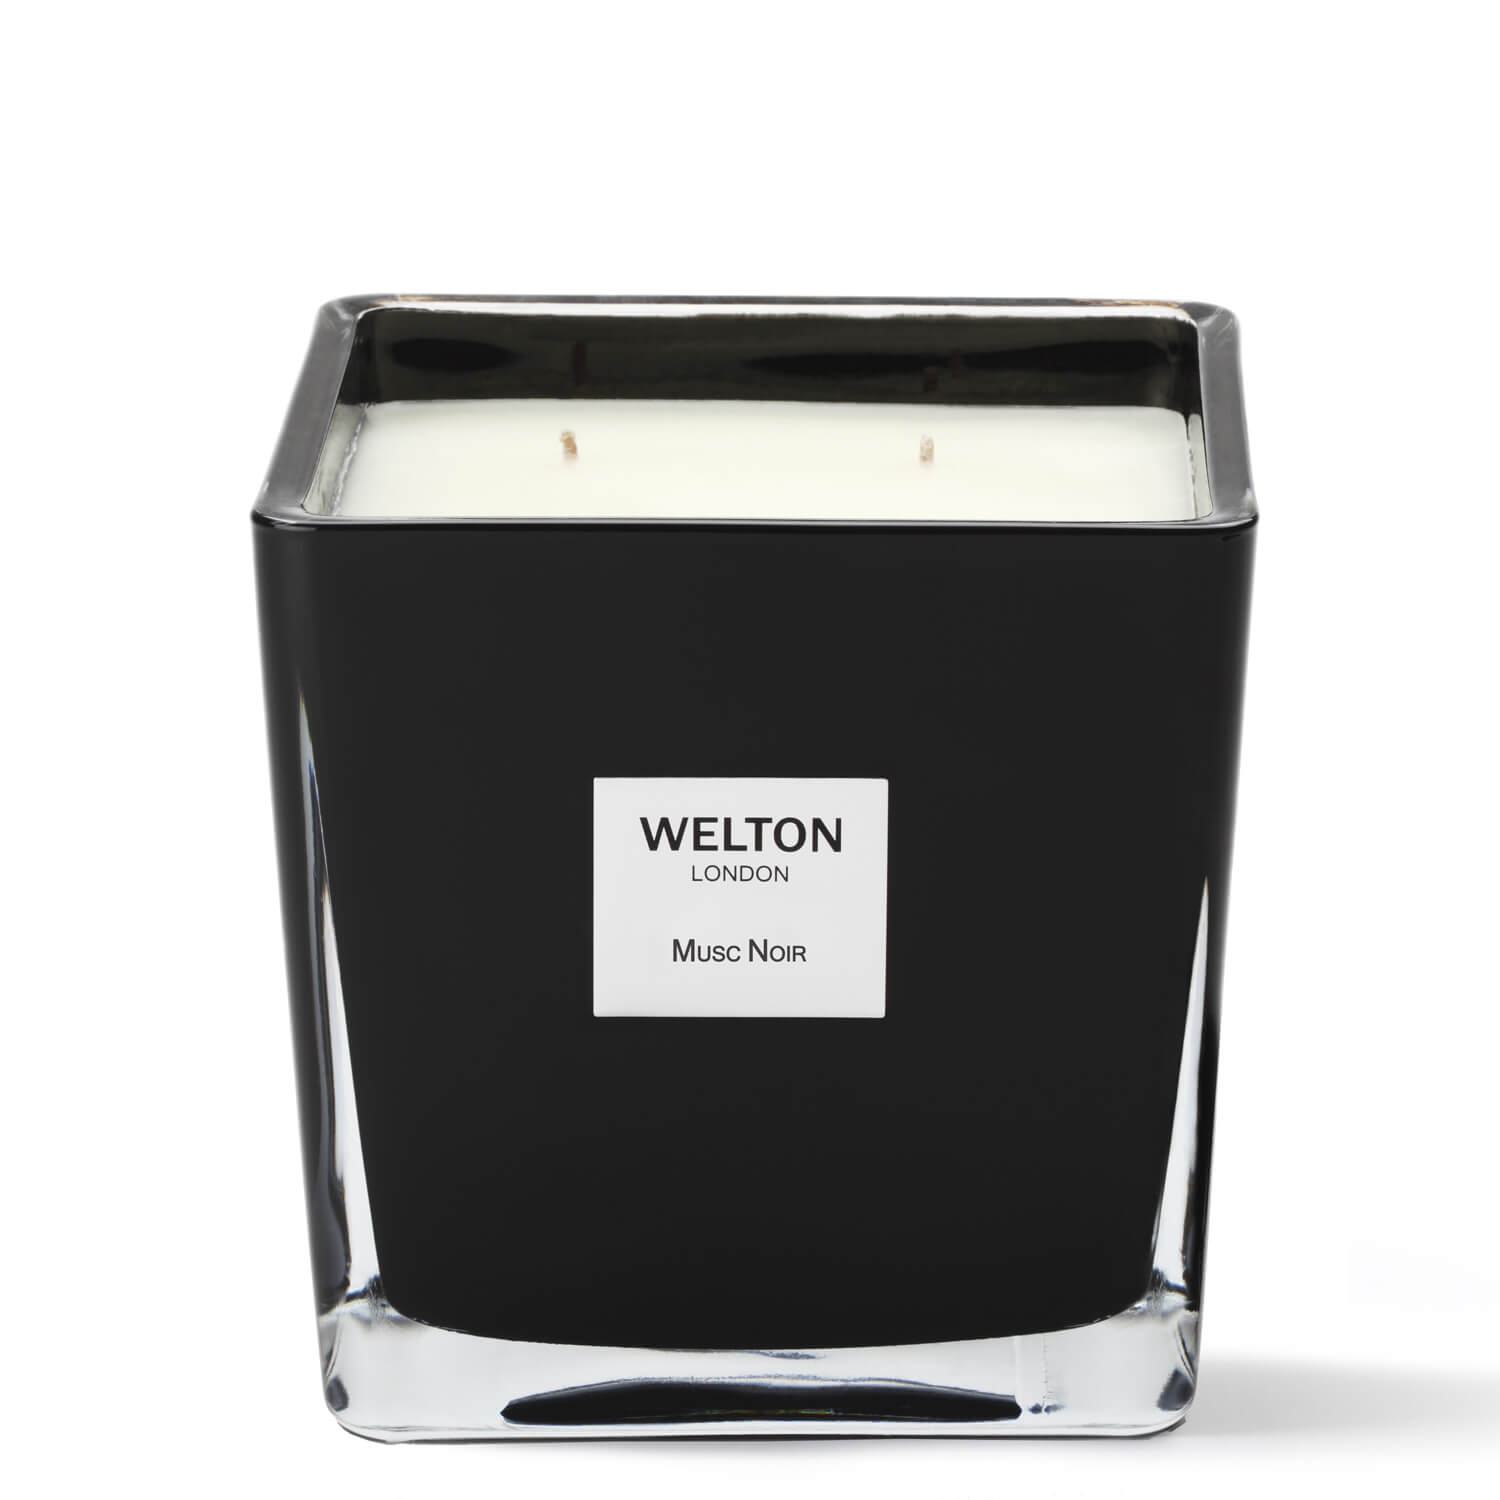 welton london candle musc noir large
floral - musky scented candles 